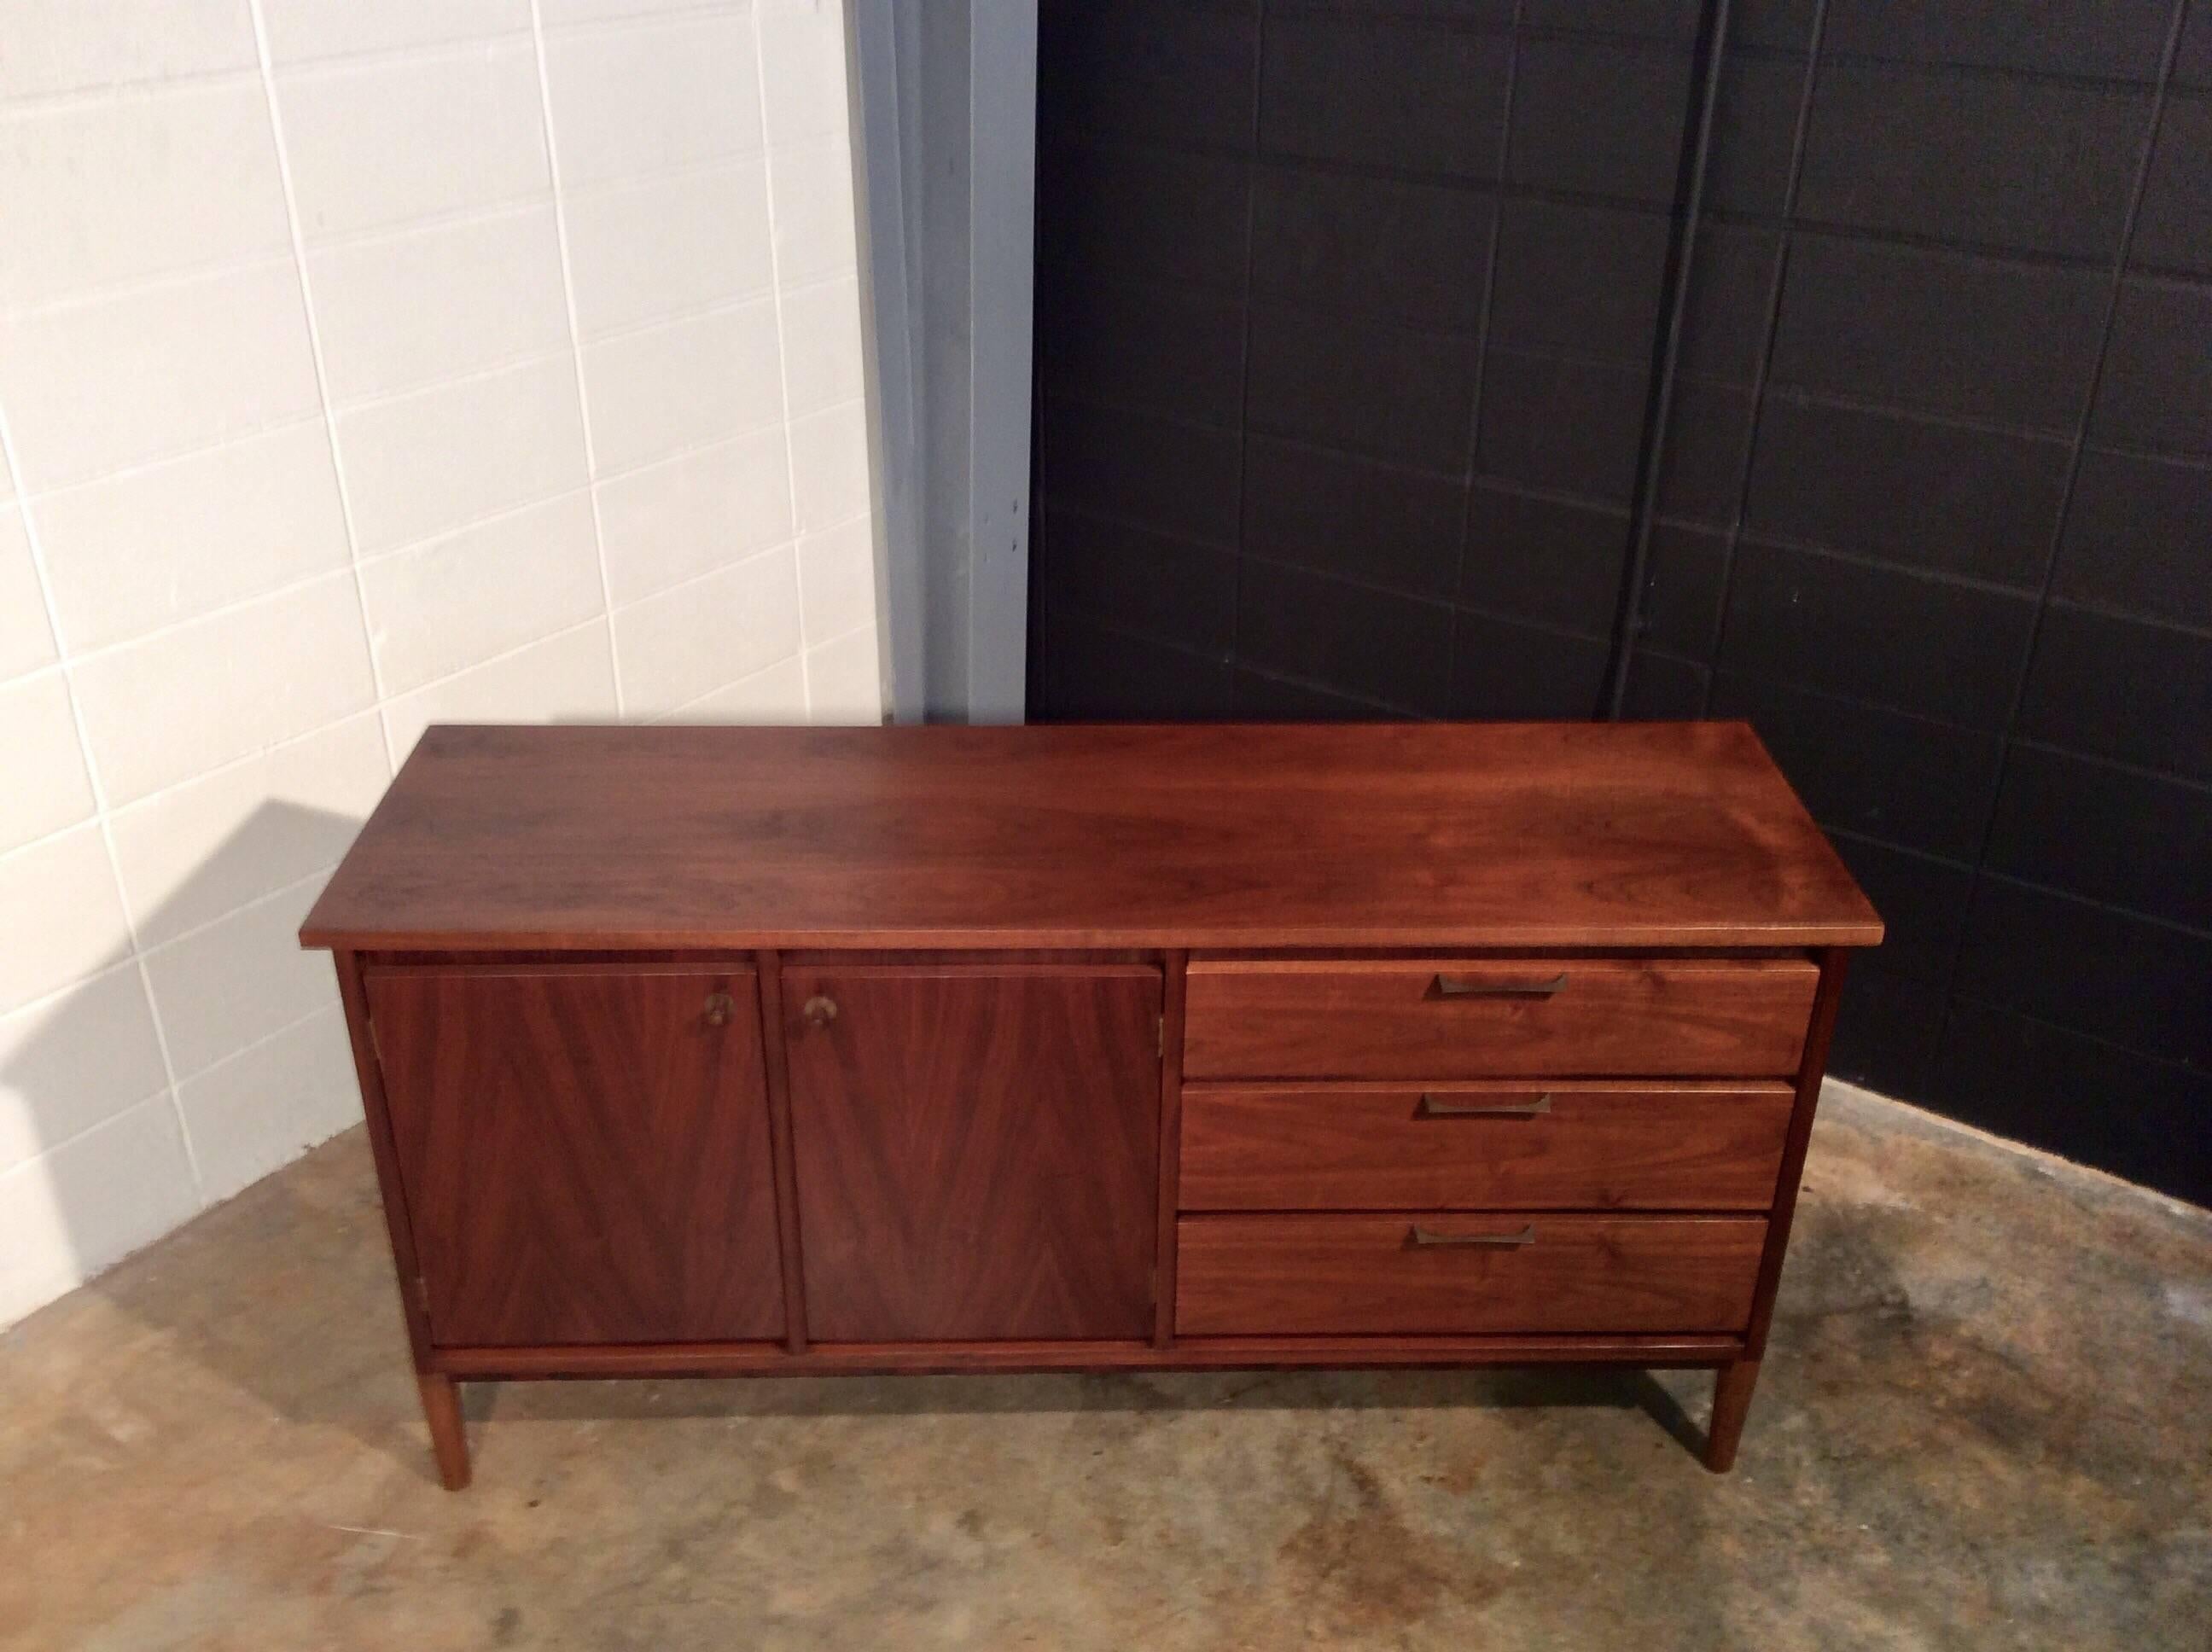 Unique Mid-Century Modern Credenza or Buffet. This credenza is a well-built piece from Stanley Furniture's Distinctive collection. It features warm walnut wood and external legs to create a more distinct appearance. This item has been restored and